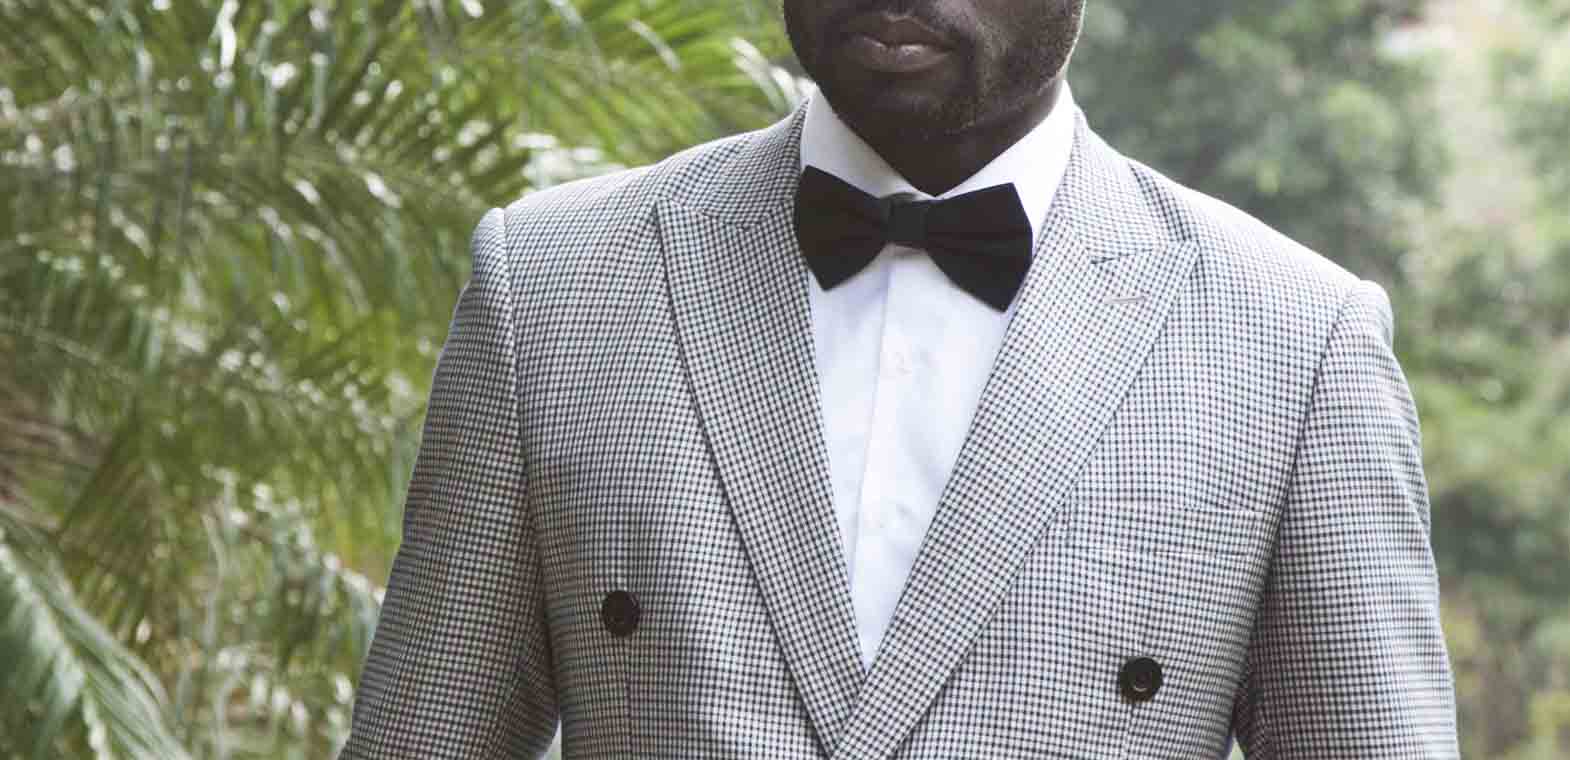 bespoke double-breasted suit by Ghanaian tailor Adjei Anang